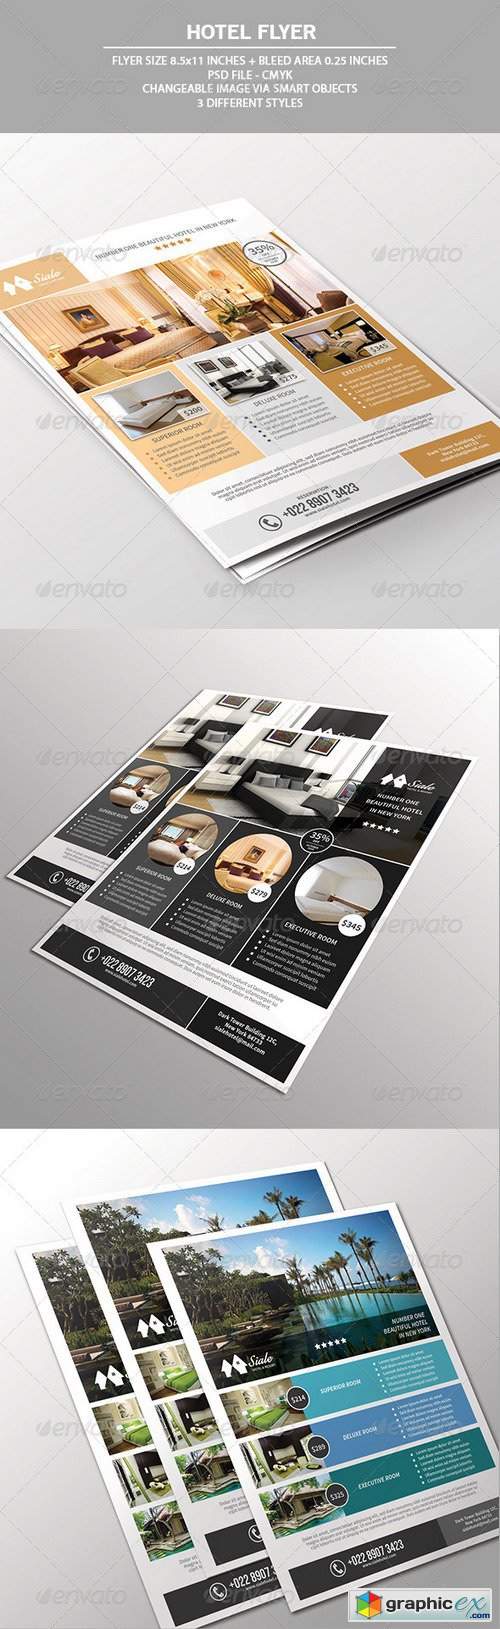 Hotel Flyer Template 7528621